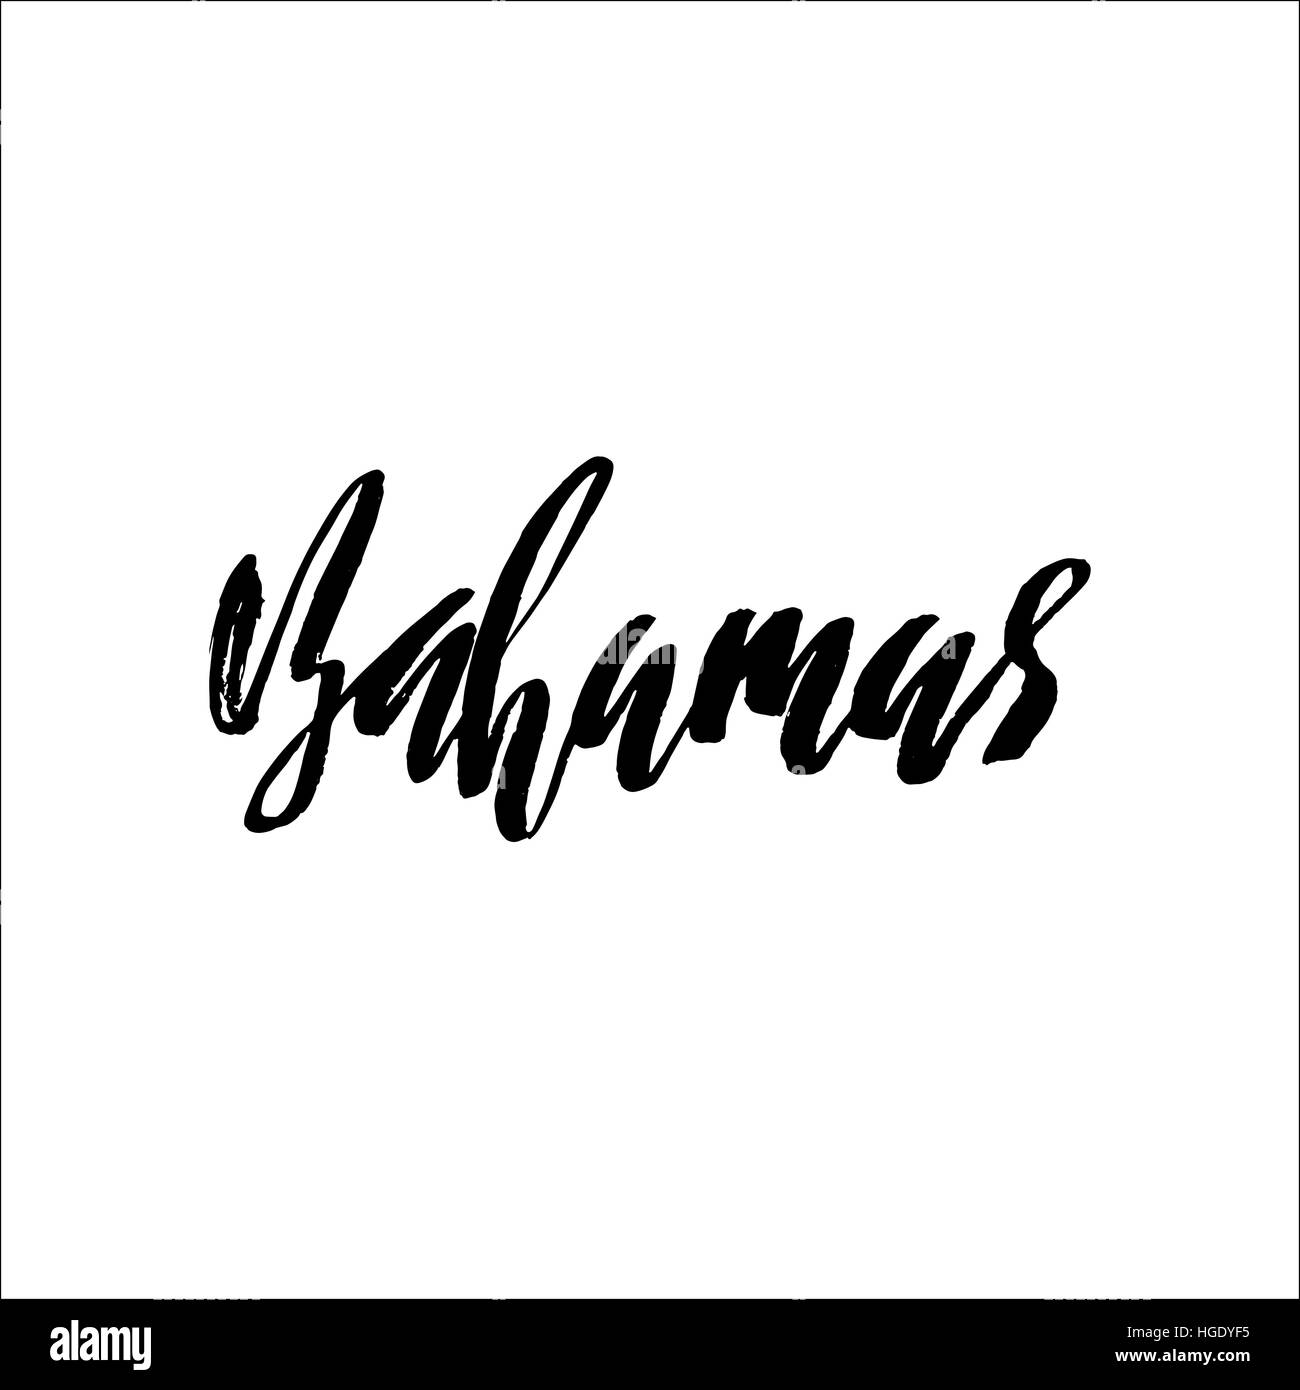 The Bahamas, hand-lettered paint, hand drawn calligraphy, vector illustration. Stock Vector